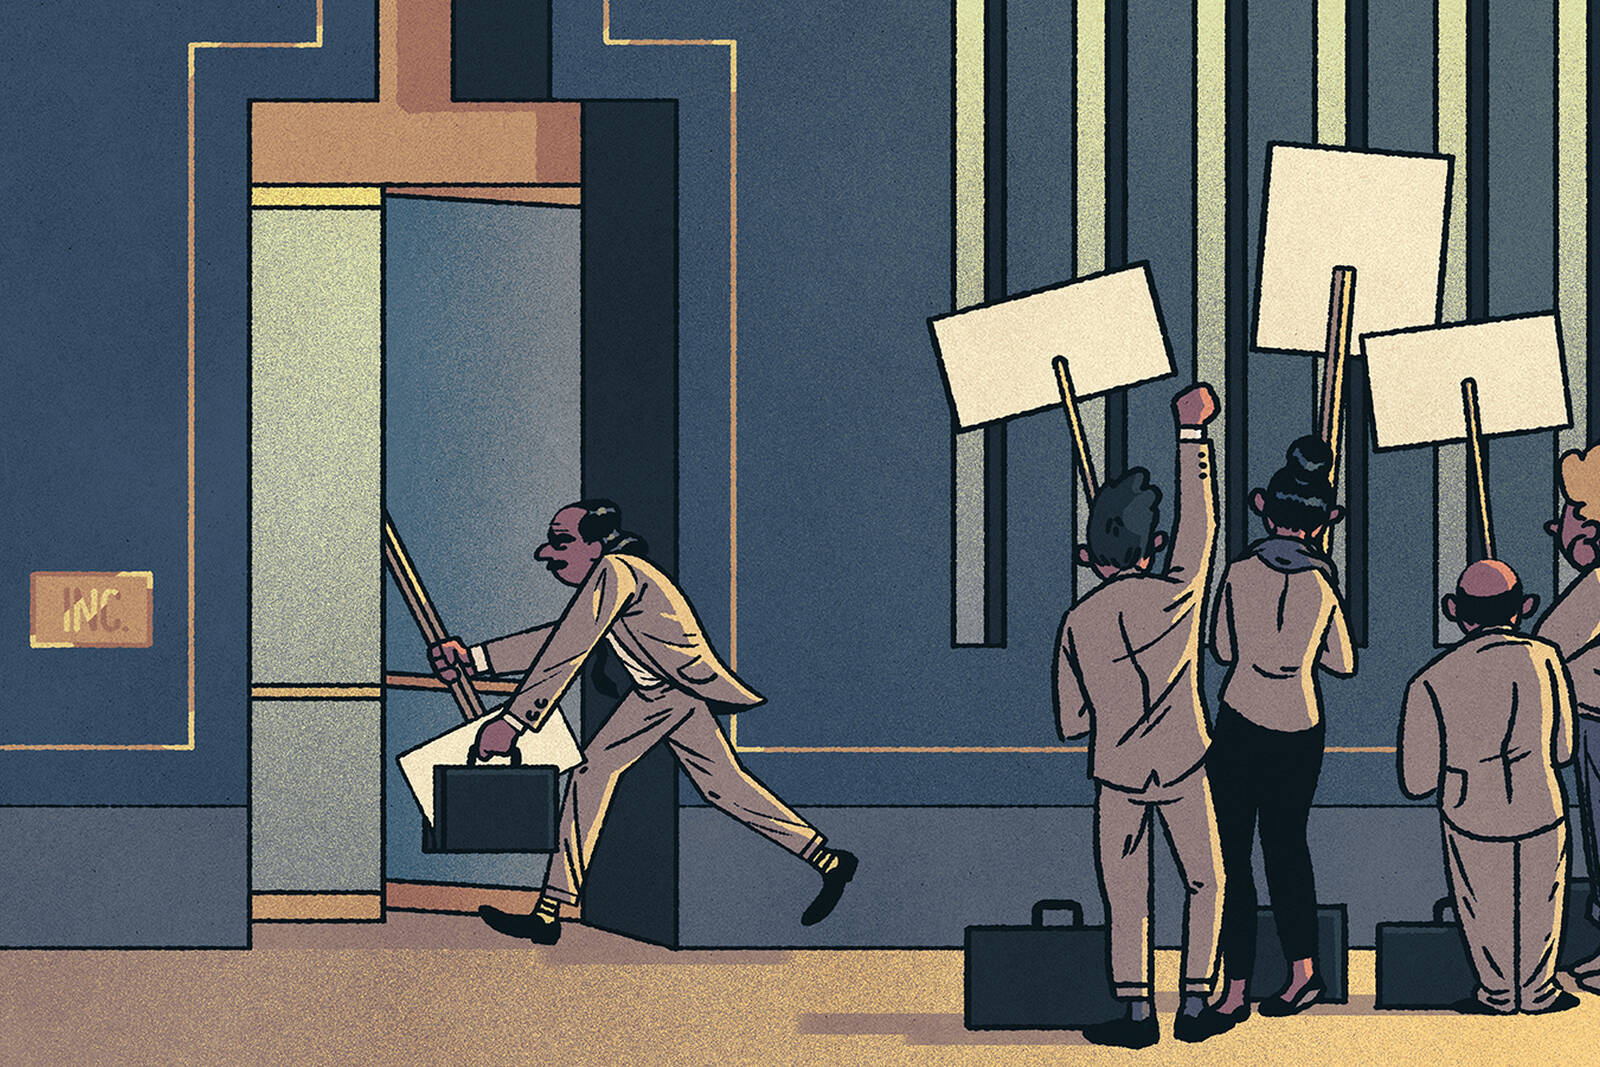 A Wall Street worker hides his activism at work.